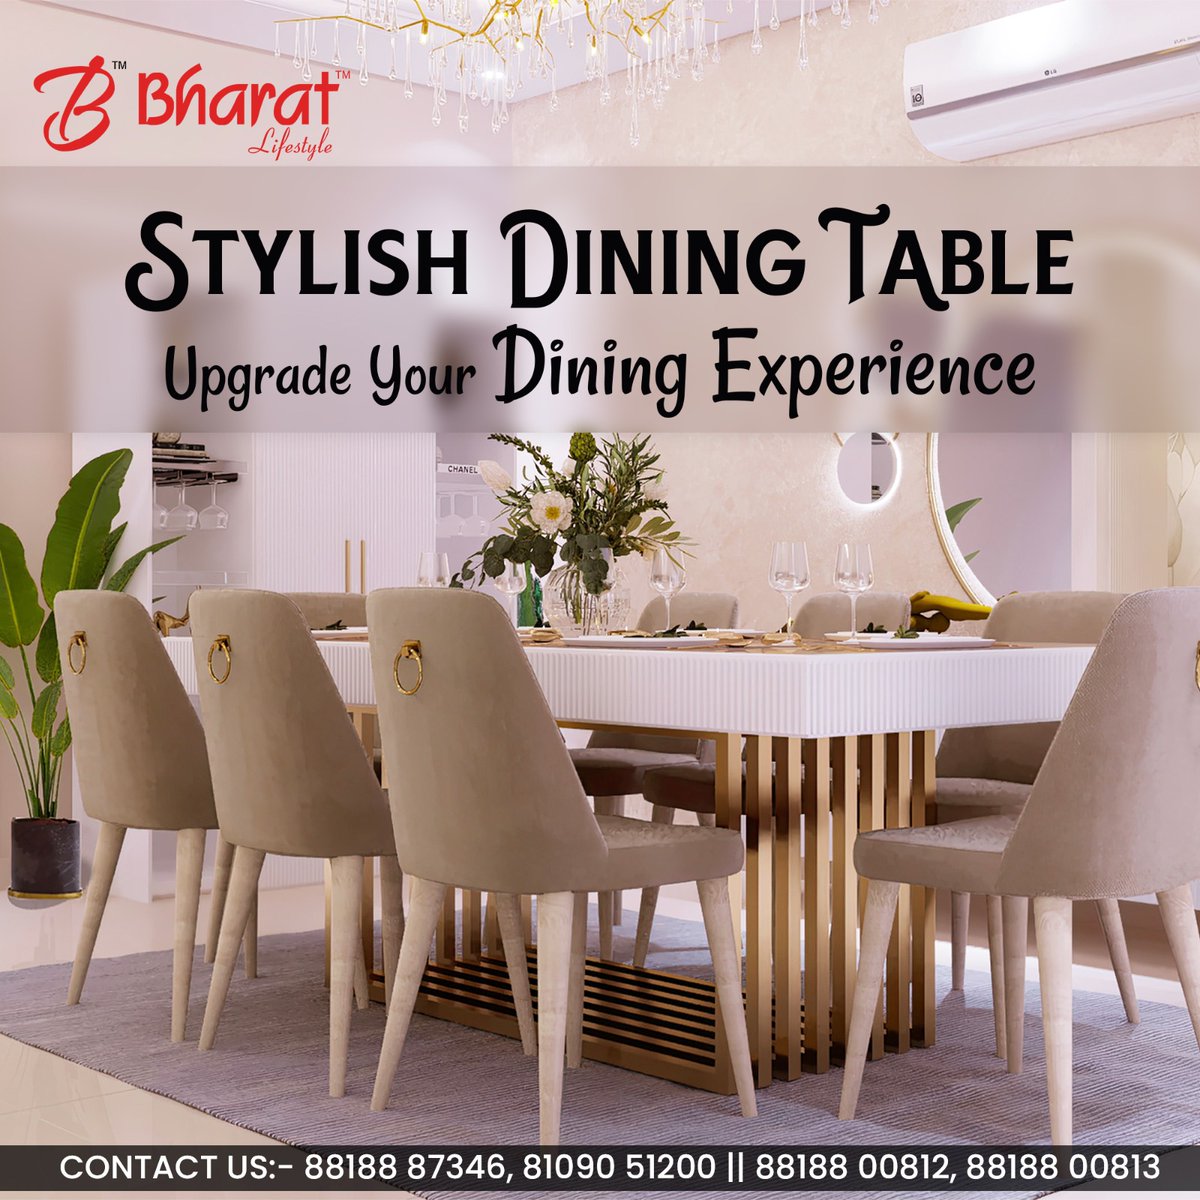 Stylish Dining Table Upgrade Your Dining Experience
.
.
Visit:- bharatlifestylefurniture.com
.
.
#diningtable #diningroom #diningdecor #diningarea #diningroomdecor #diningtabledecor #diningchairs #diningtableset #diningroominspo #diningtablestyling #diningtabledesign #diningroomtable